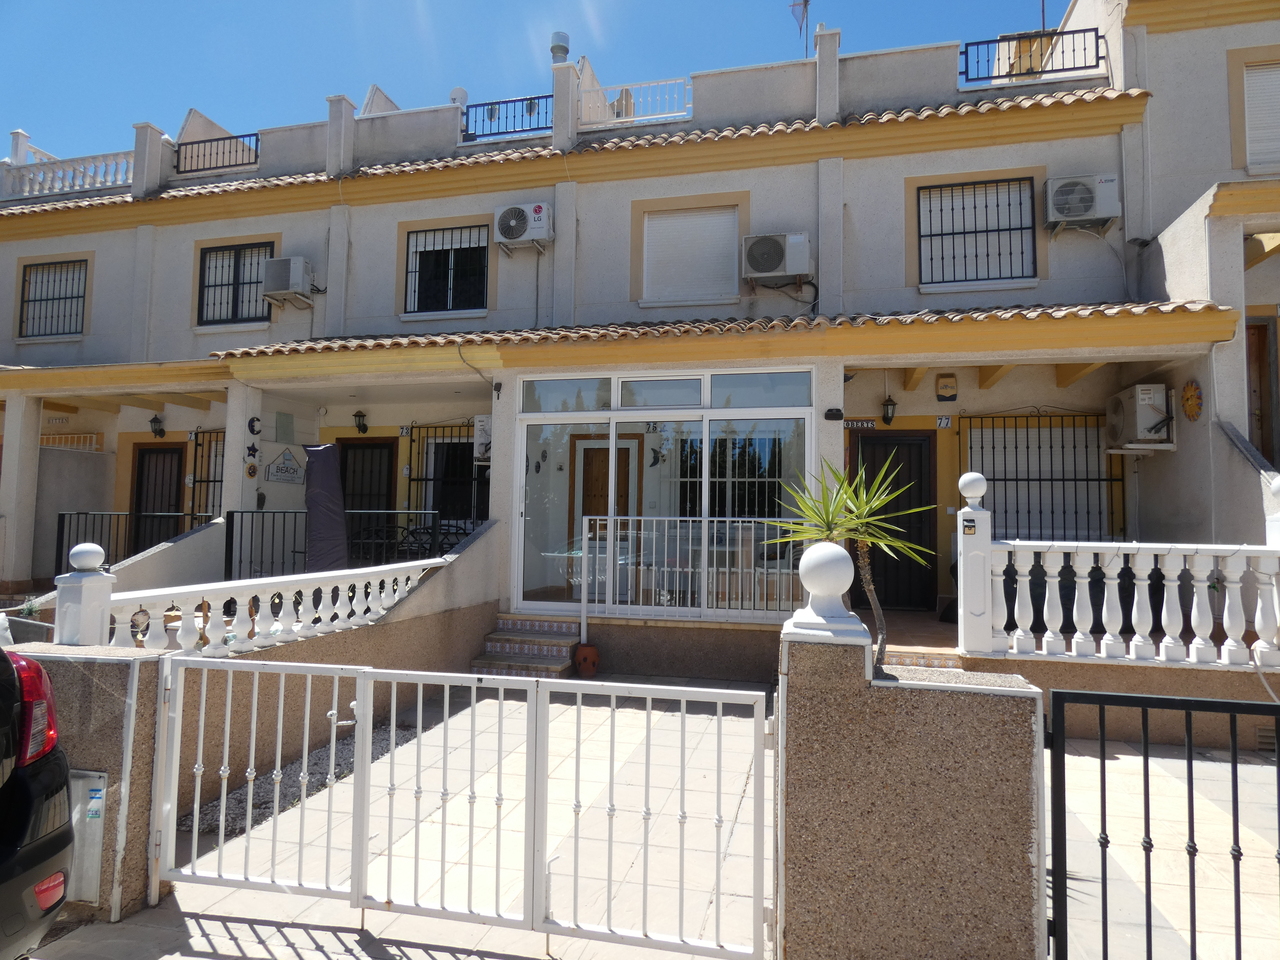 For Sale: 
Townhouse in Algorfa Beds: 2 Baths: 2 Price: 109,995€